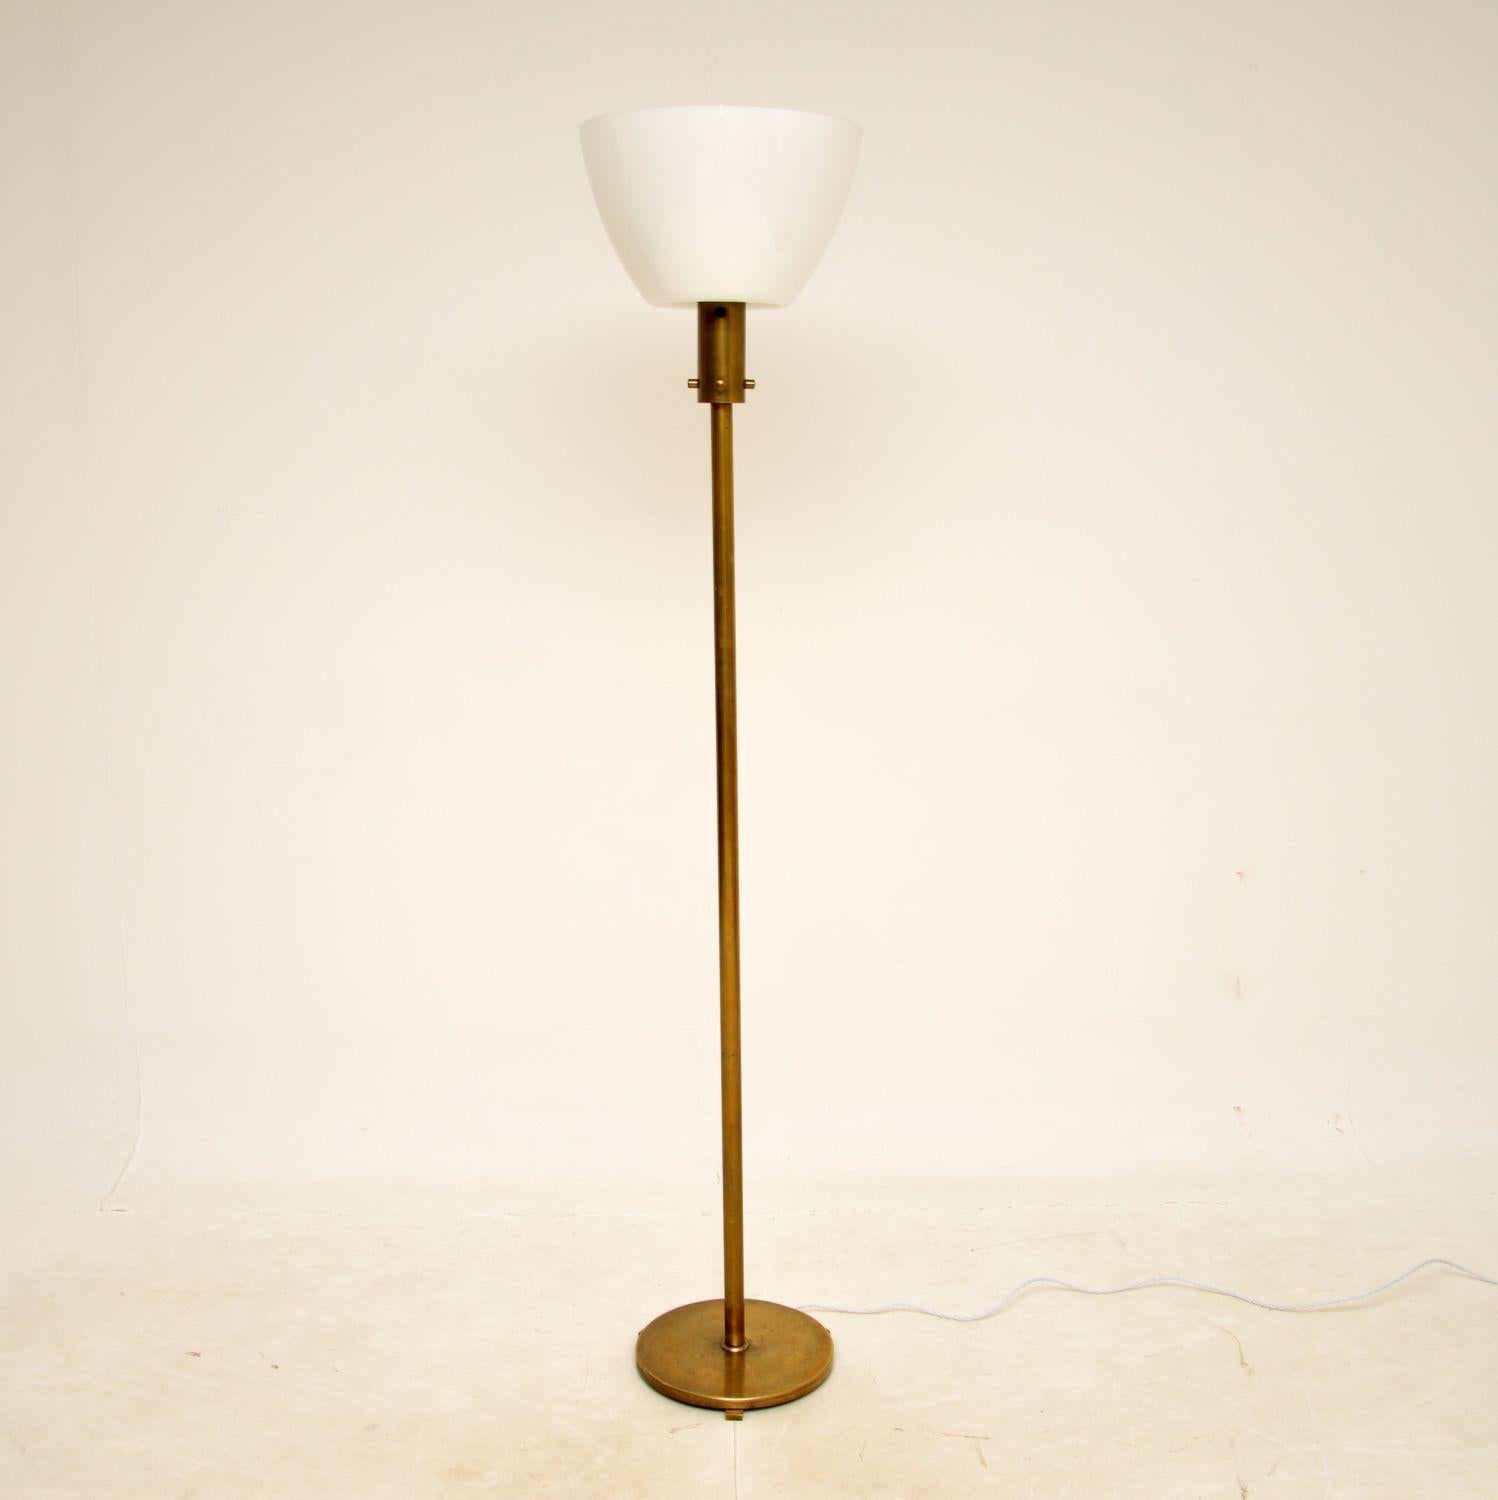 A beautiful and very stylish vintage French up-lighting floor lamp in brass, with a stunning white glass shade. This was recently imported from France, it dates from the 1970s.

The quality is superb, the thick brass frame is very well made and